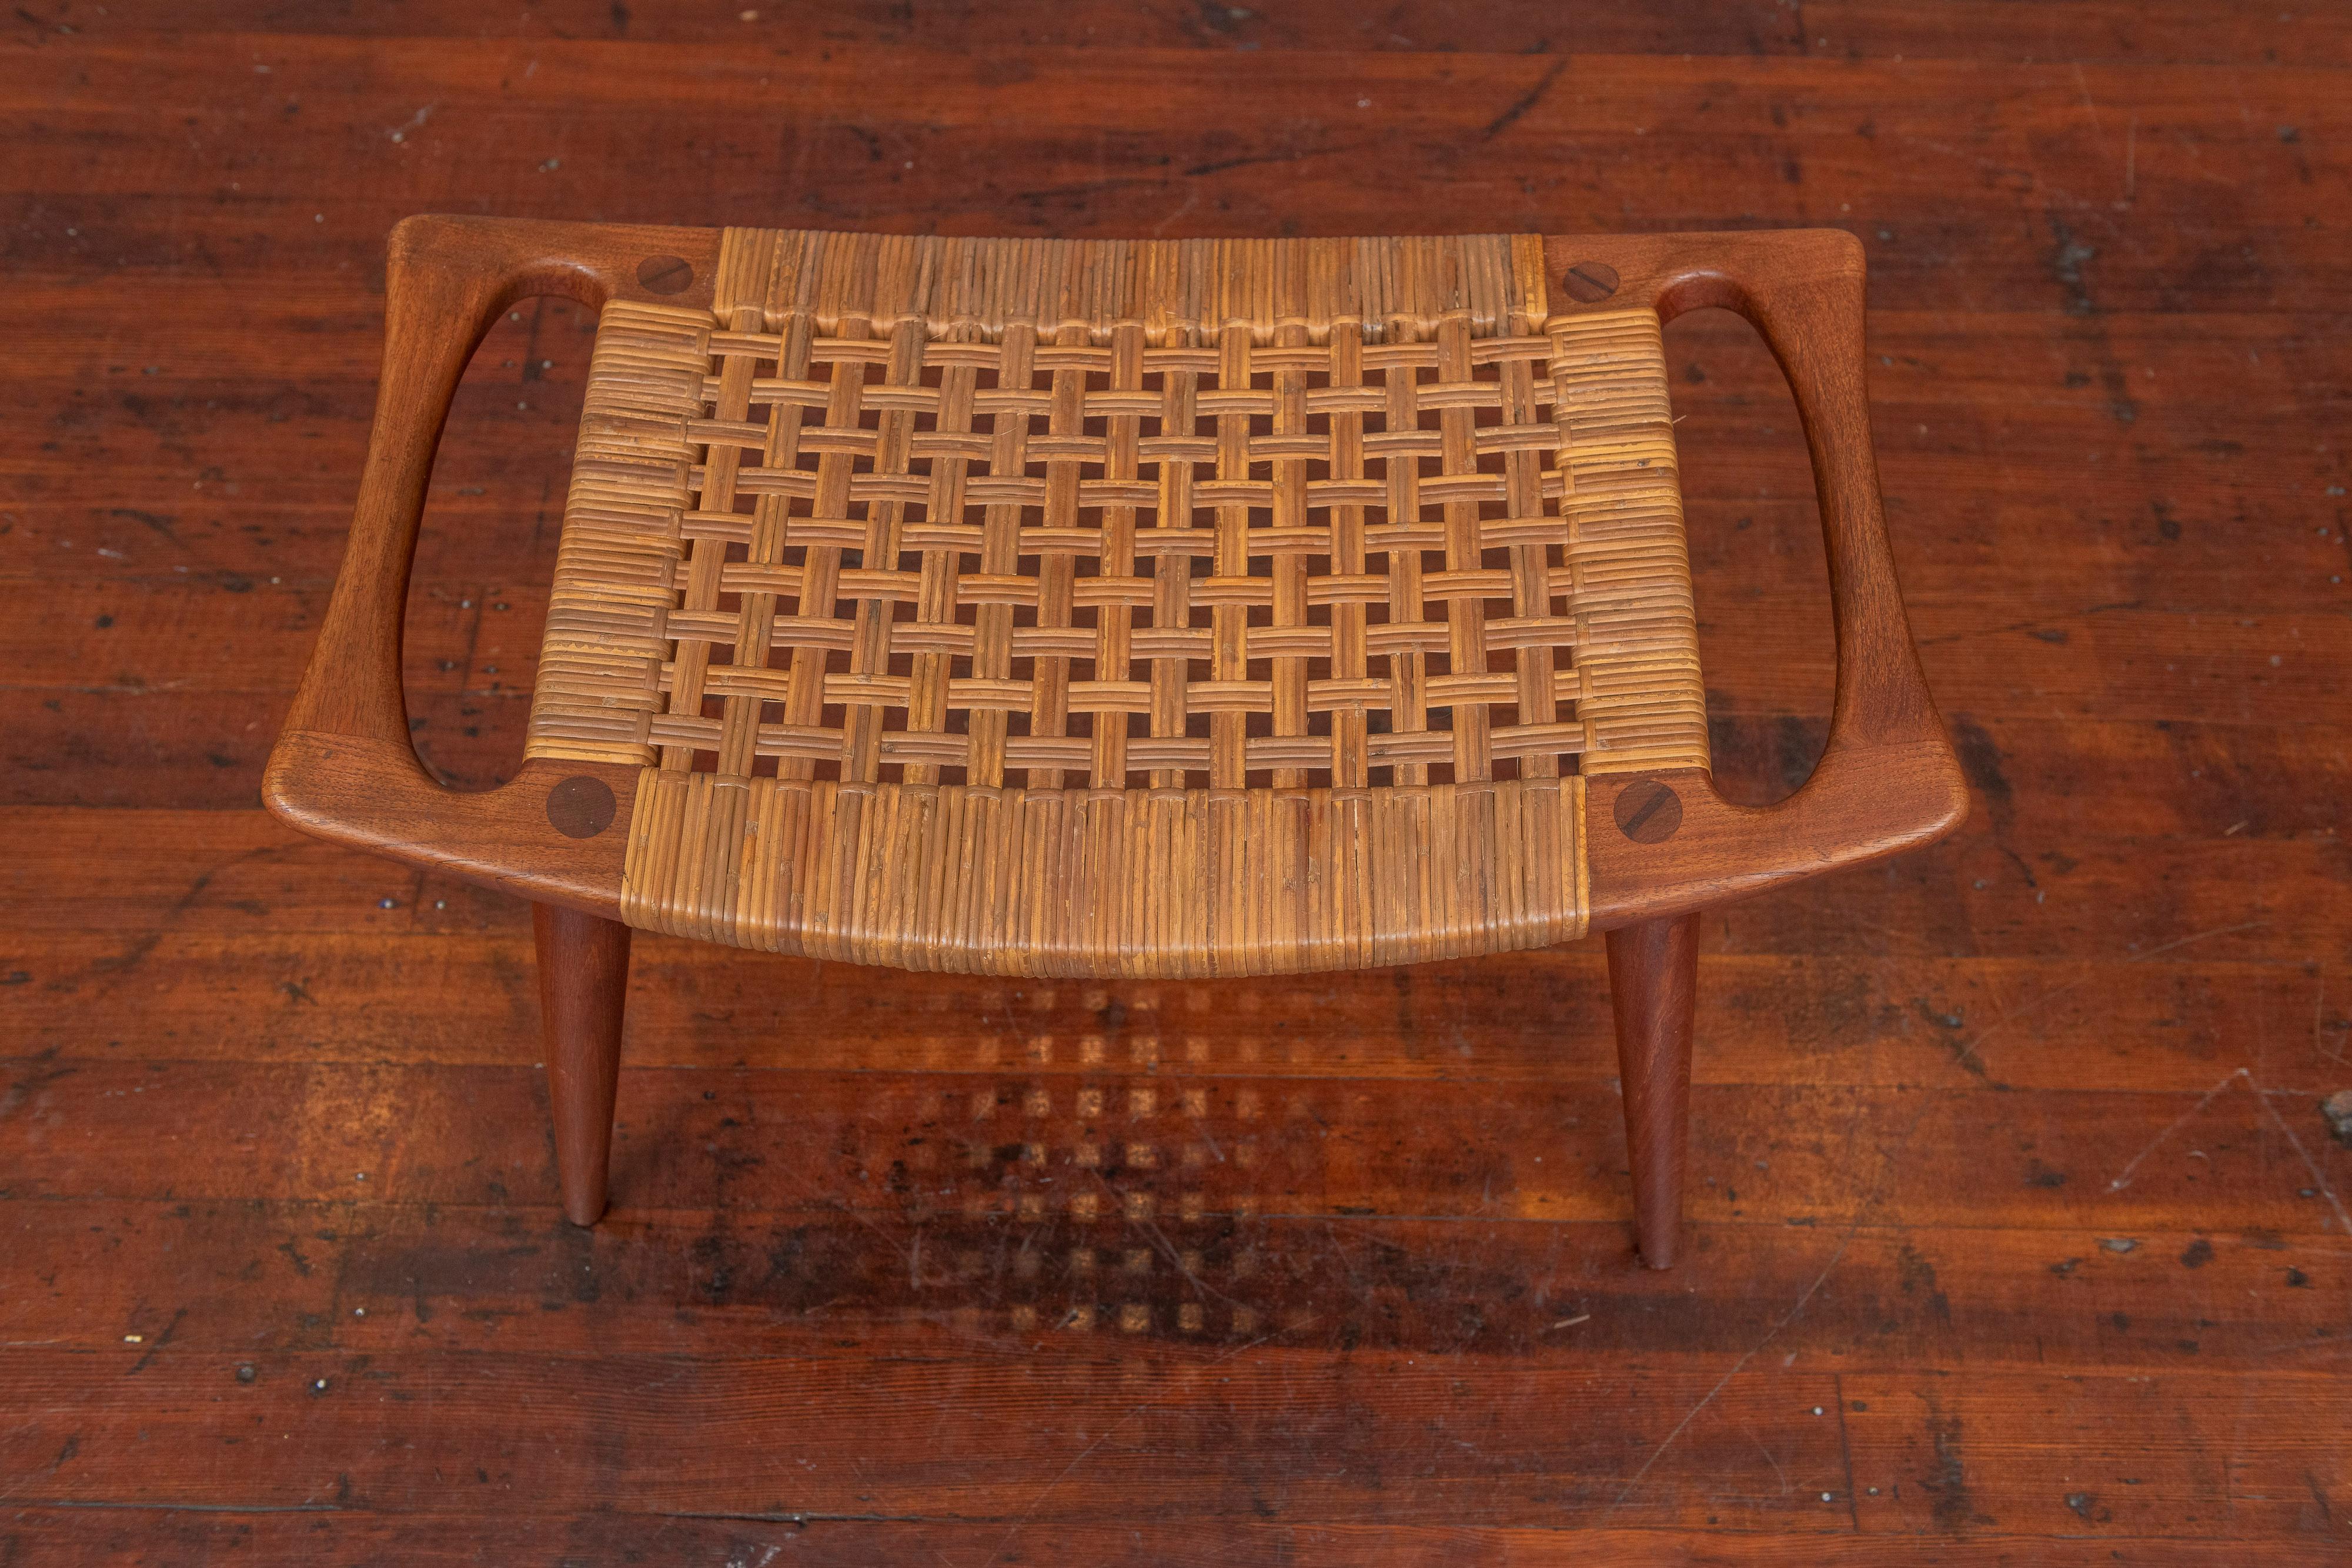 Hans Wegner design teak and cane stool or bench for Johannes Hansen Model JH539, Denmark. Very nice original condition examples of this simple yet elegant bench or stool. High quality construction and attention to details ready to be enjoyed,